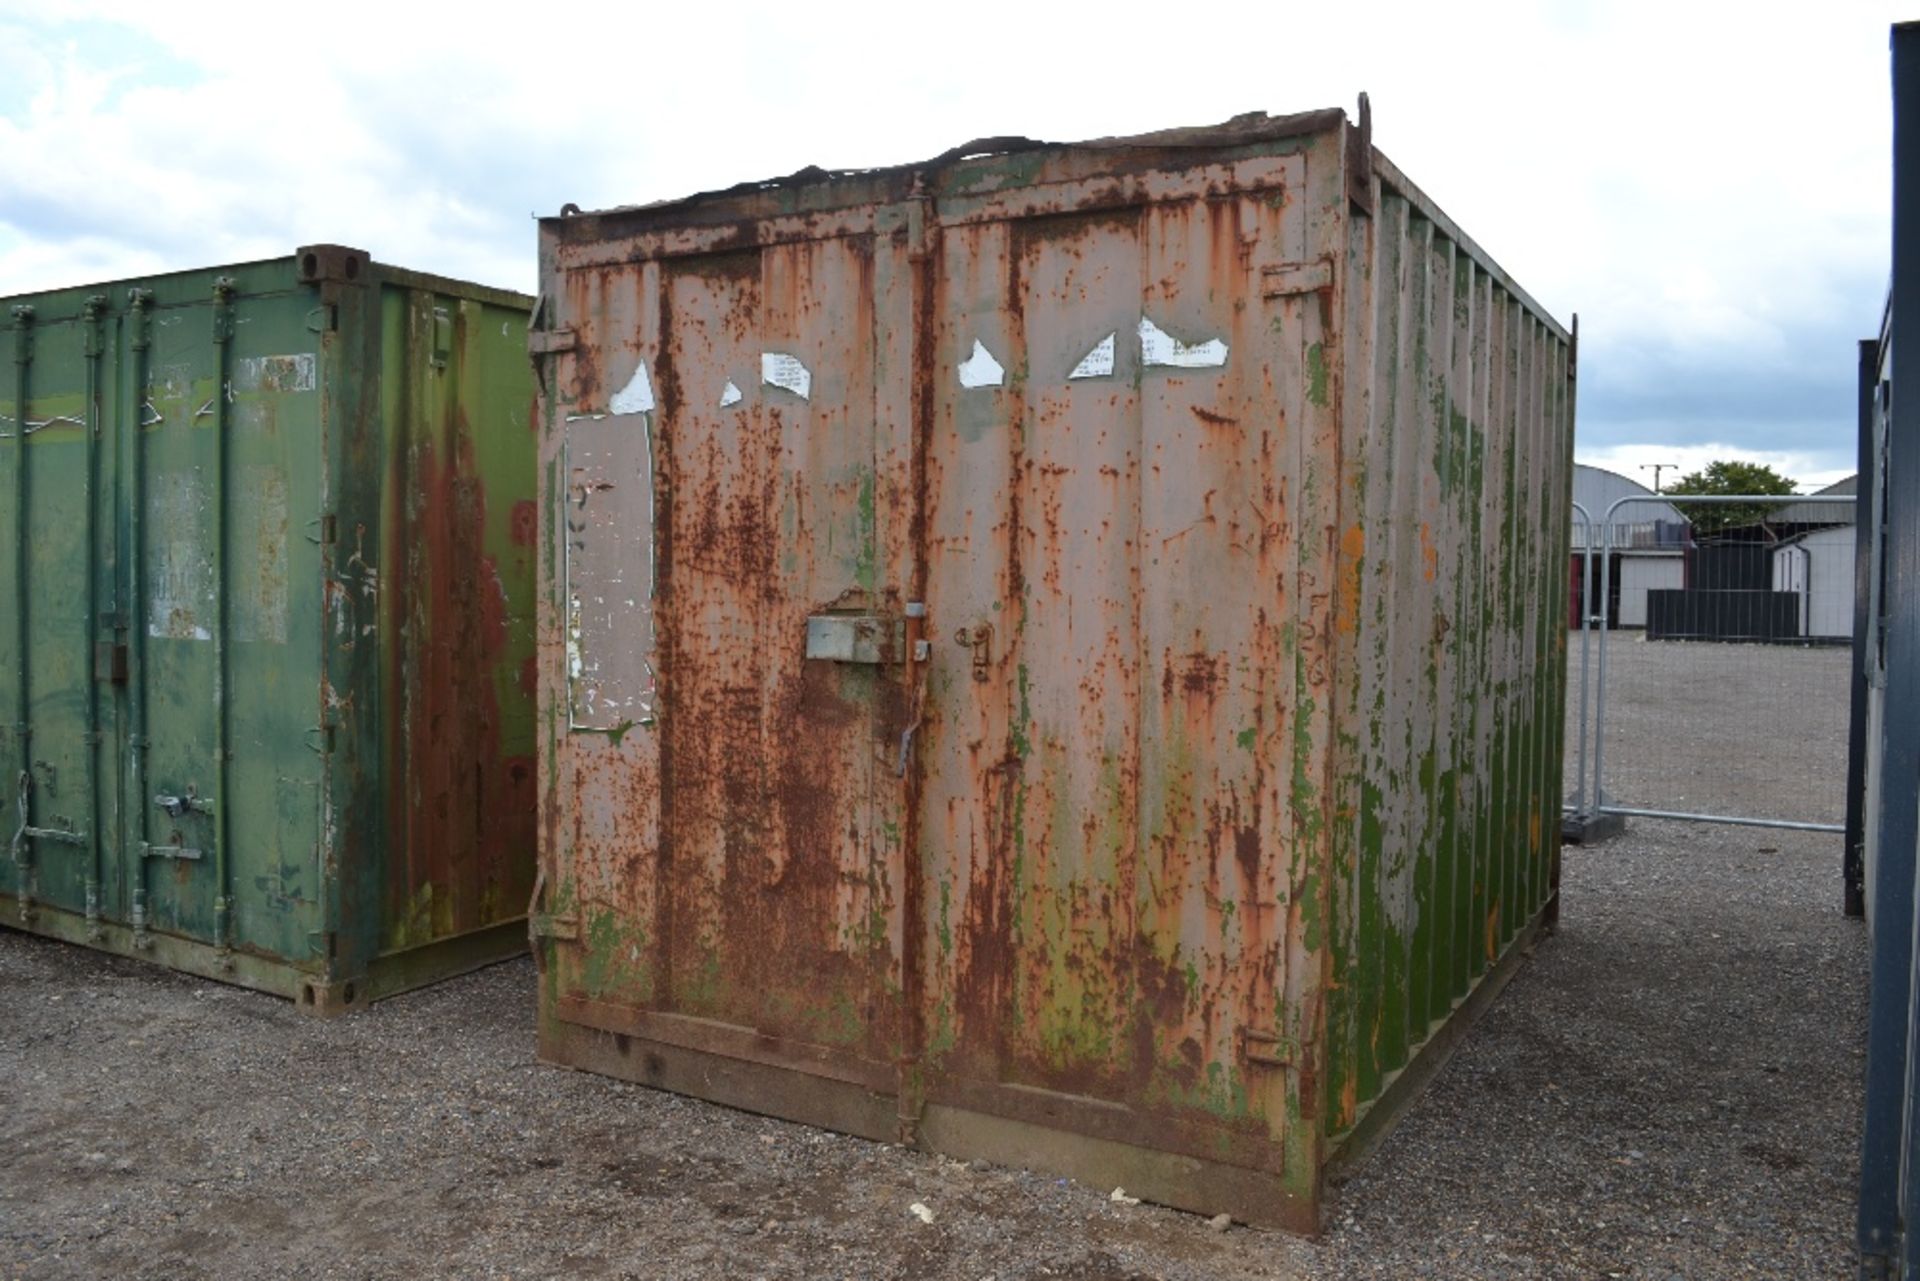 12ft x 8ft container. Loose contents not included.